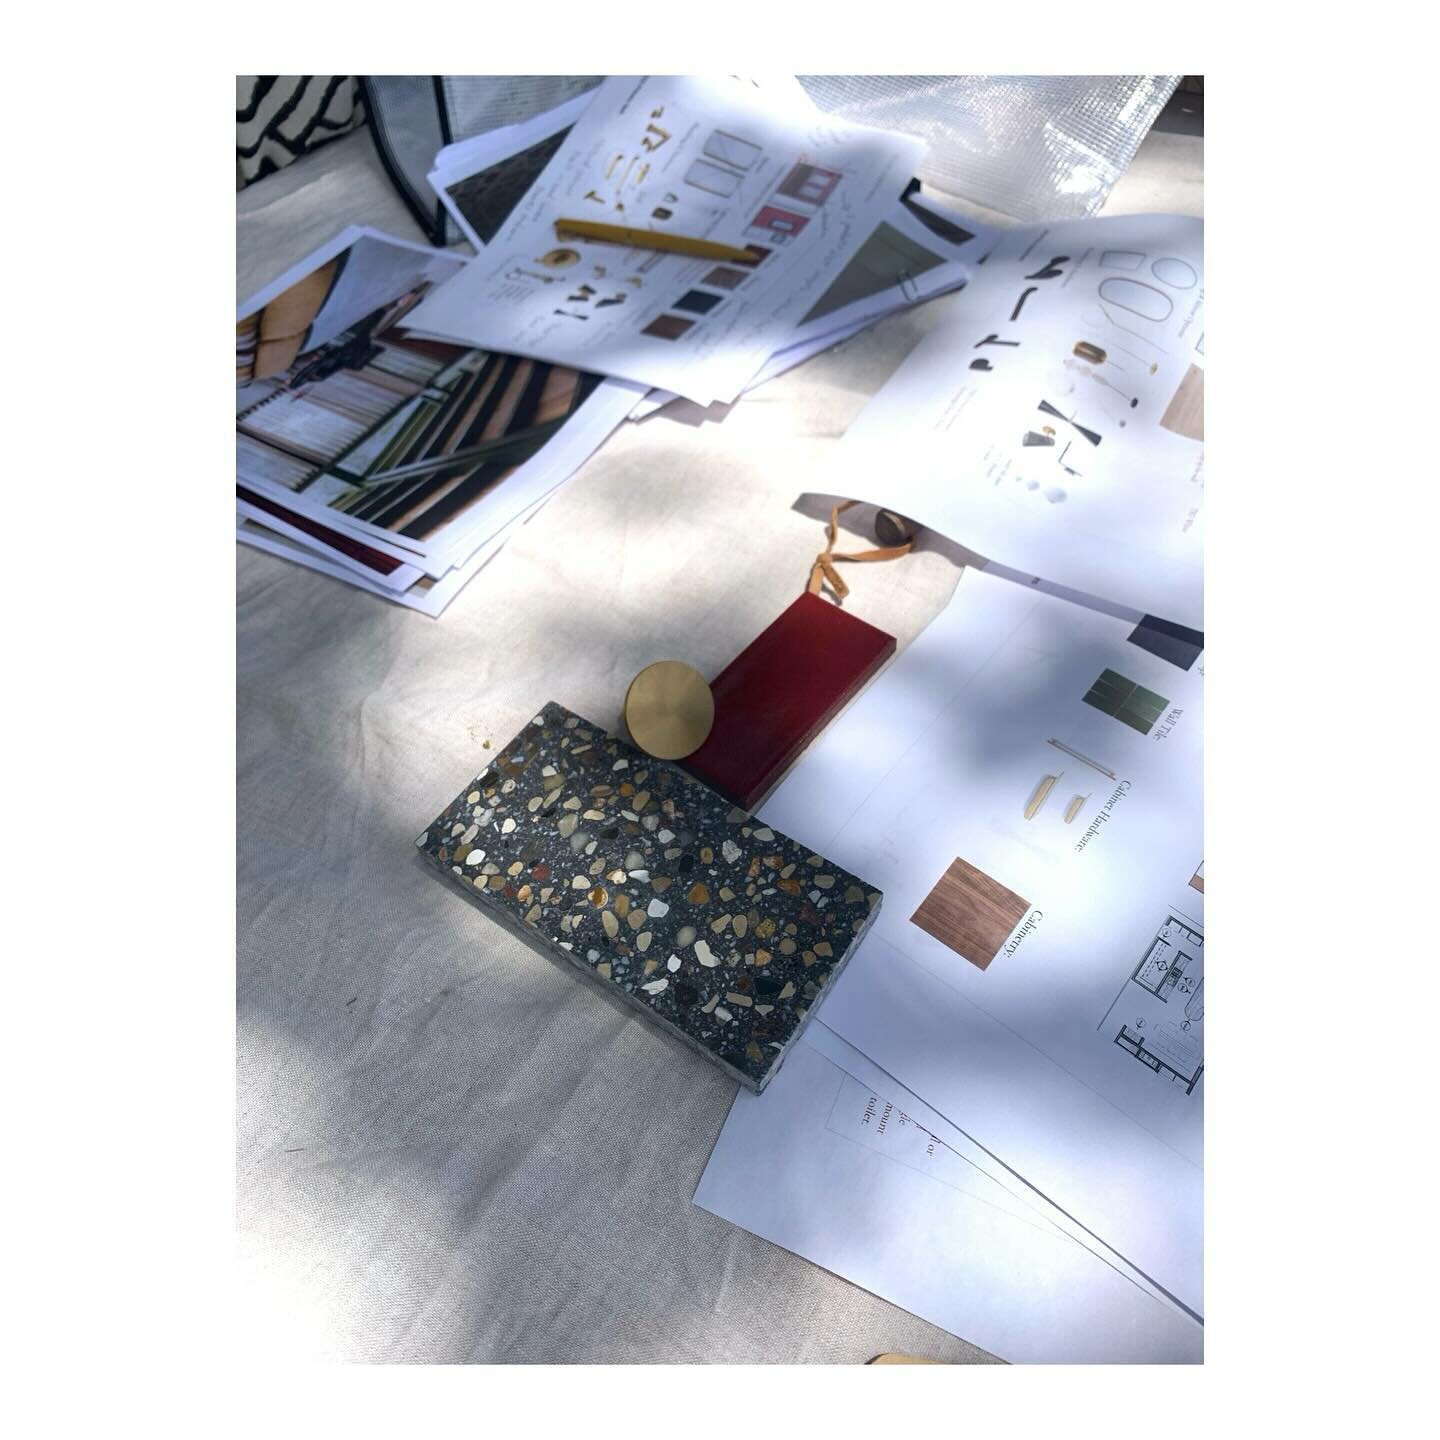 Revisiting our finish selections from last year as we approach installation. It&rsquo;s going to be a good one.
.
.
.
#homeremodel #homedesign #houserenovation